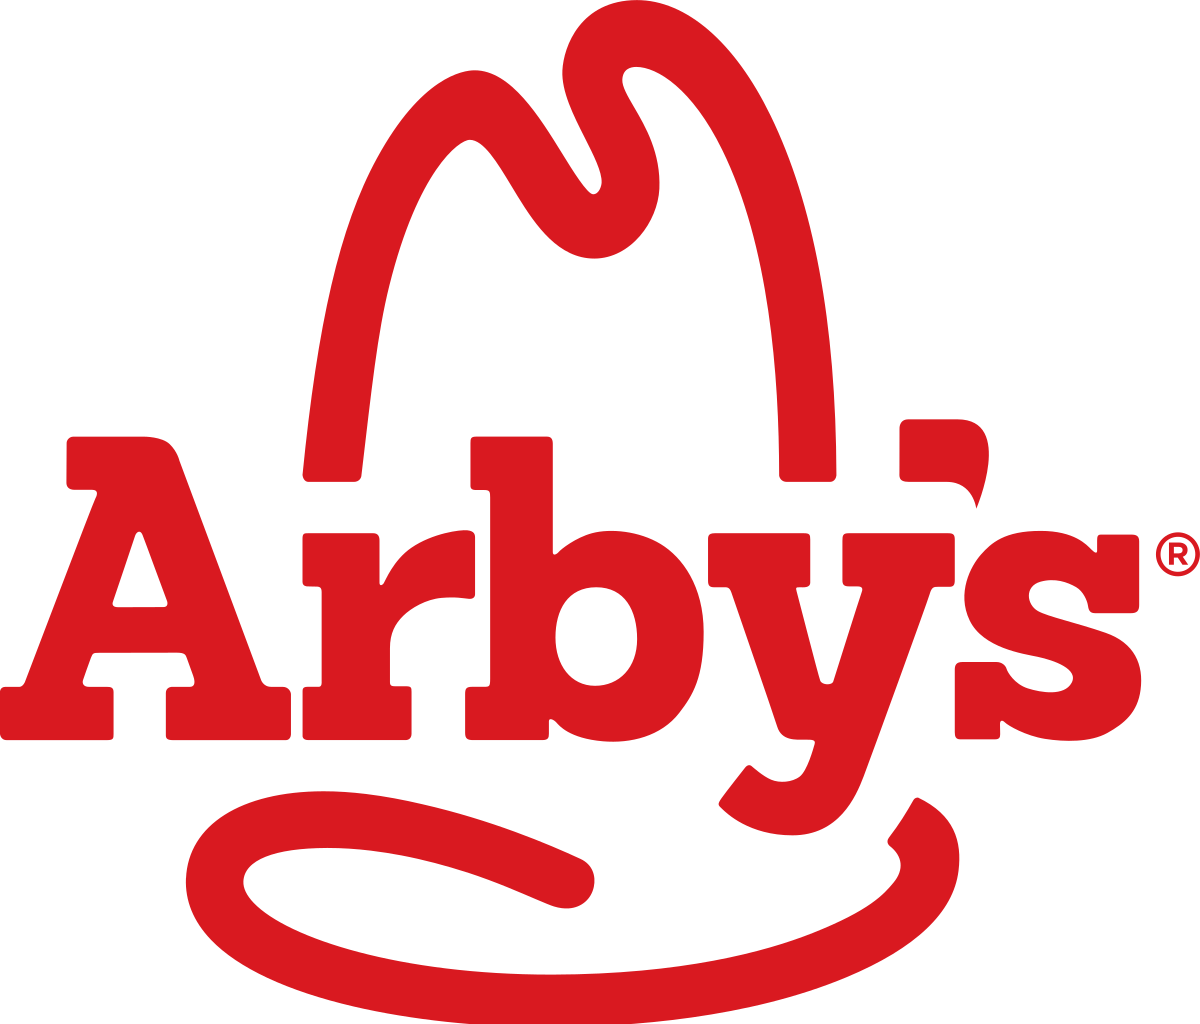 Food Chain Red Green White Lines Logo - Arby's